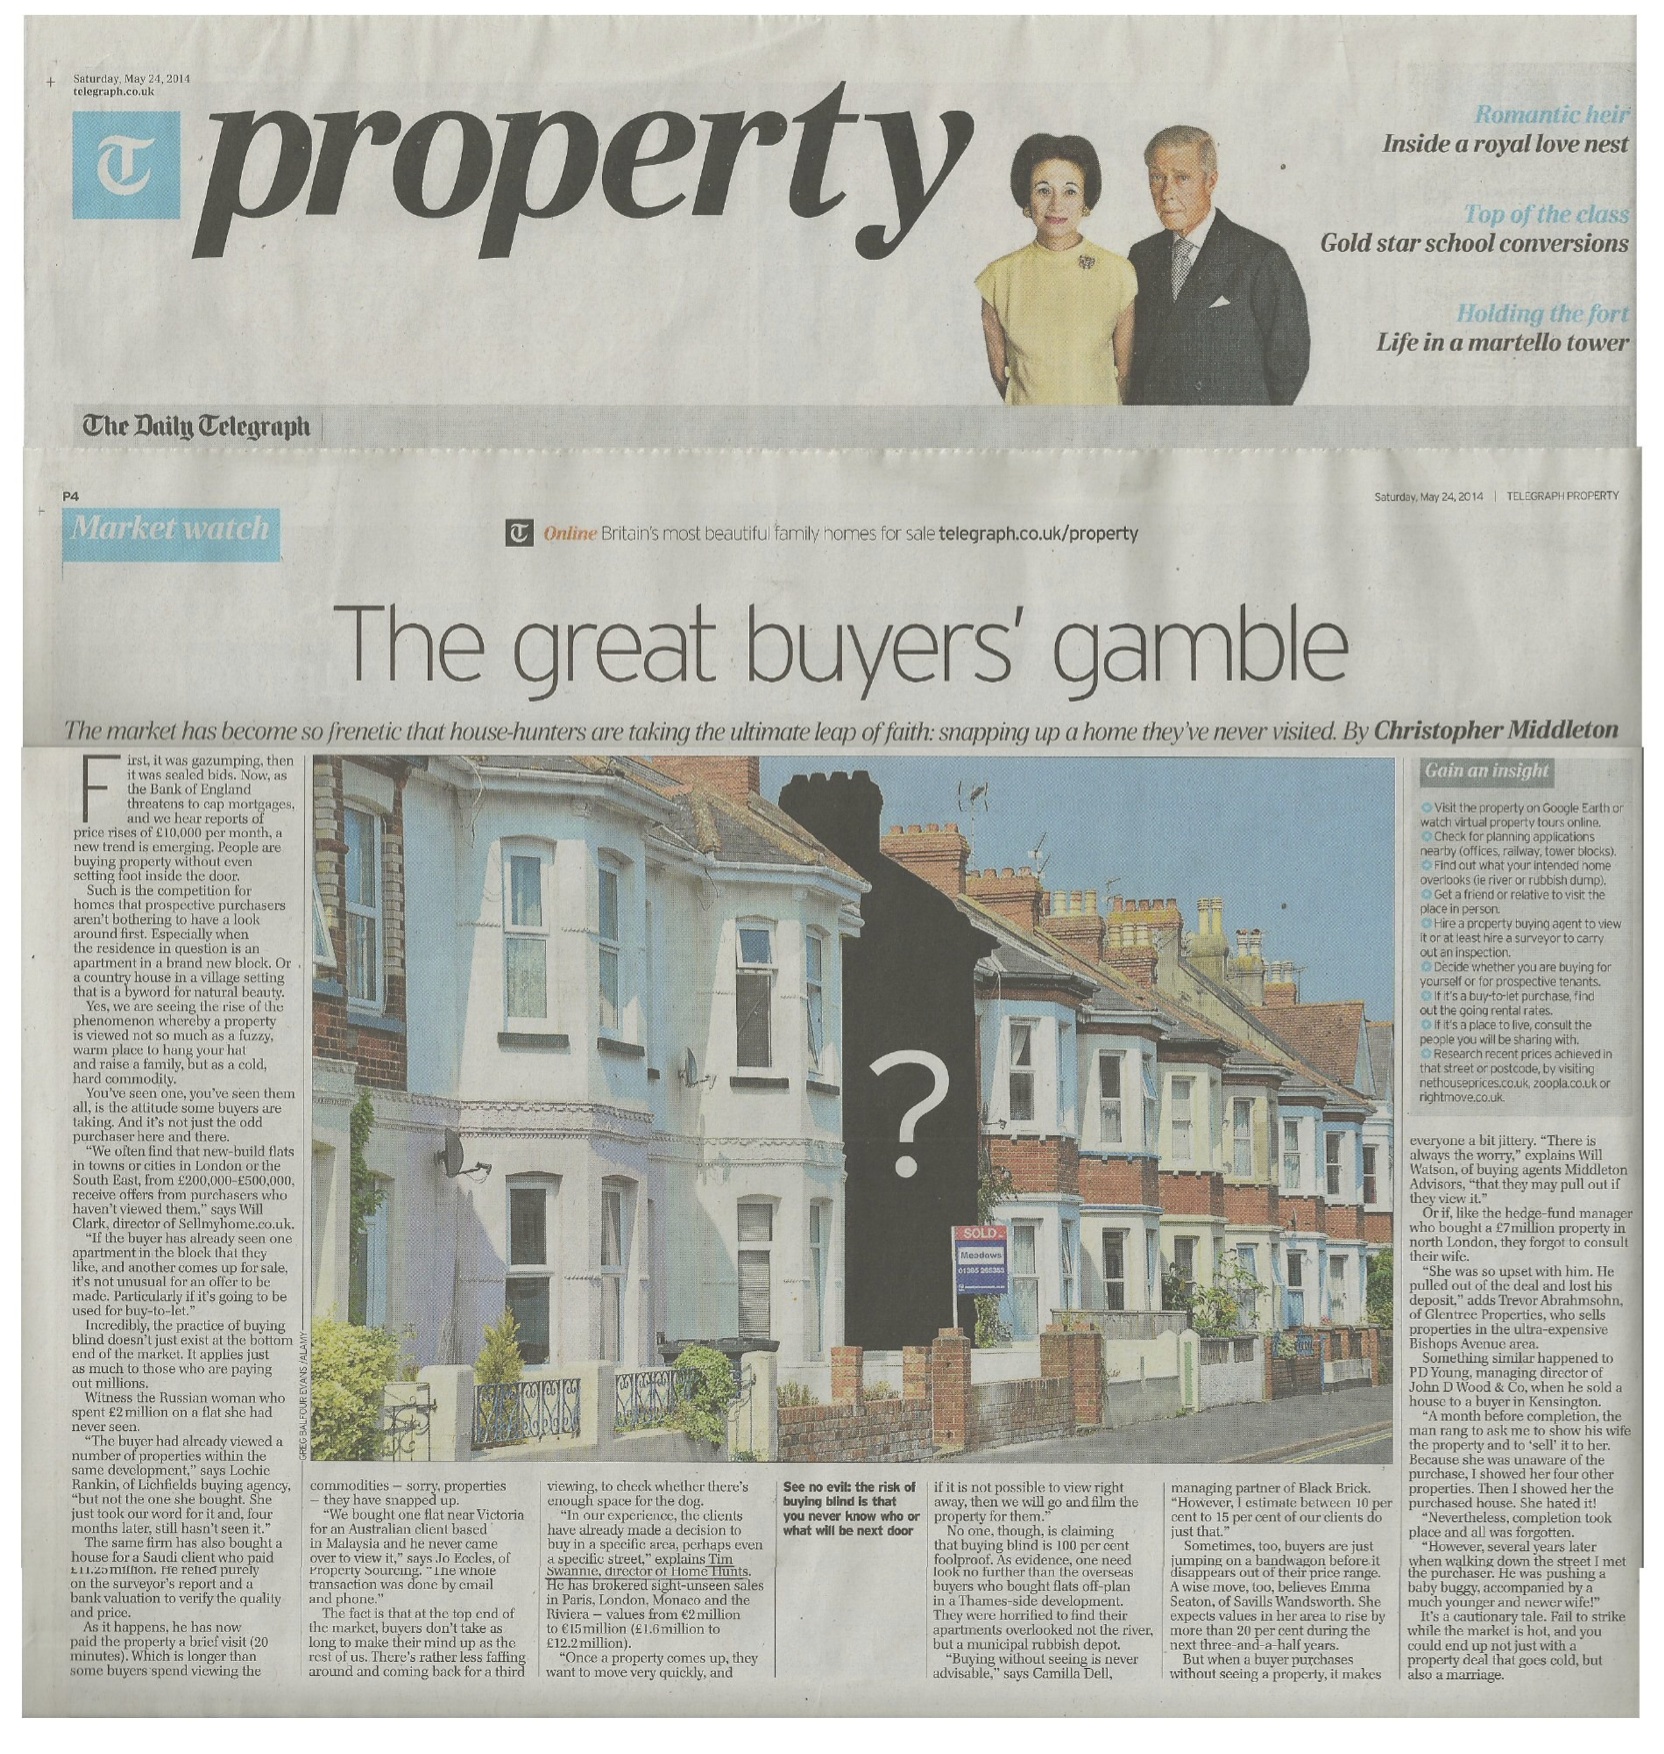 Daily Telegraph – Would you buy a house you’d never seen?